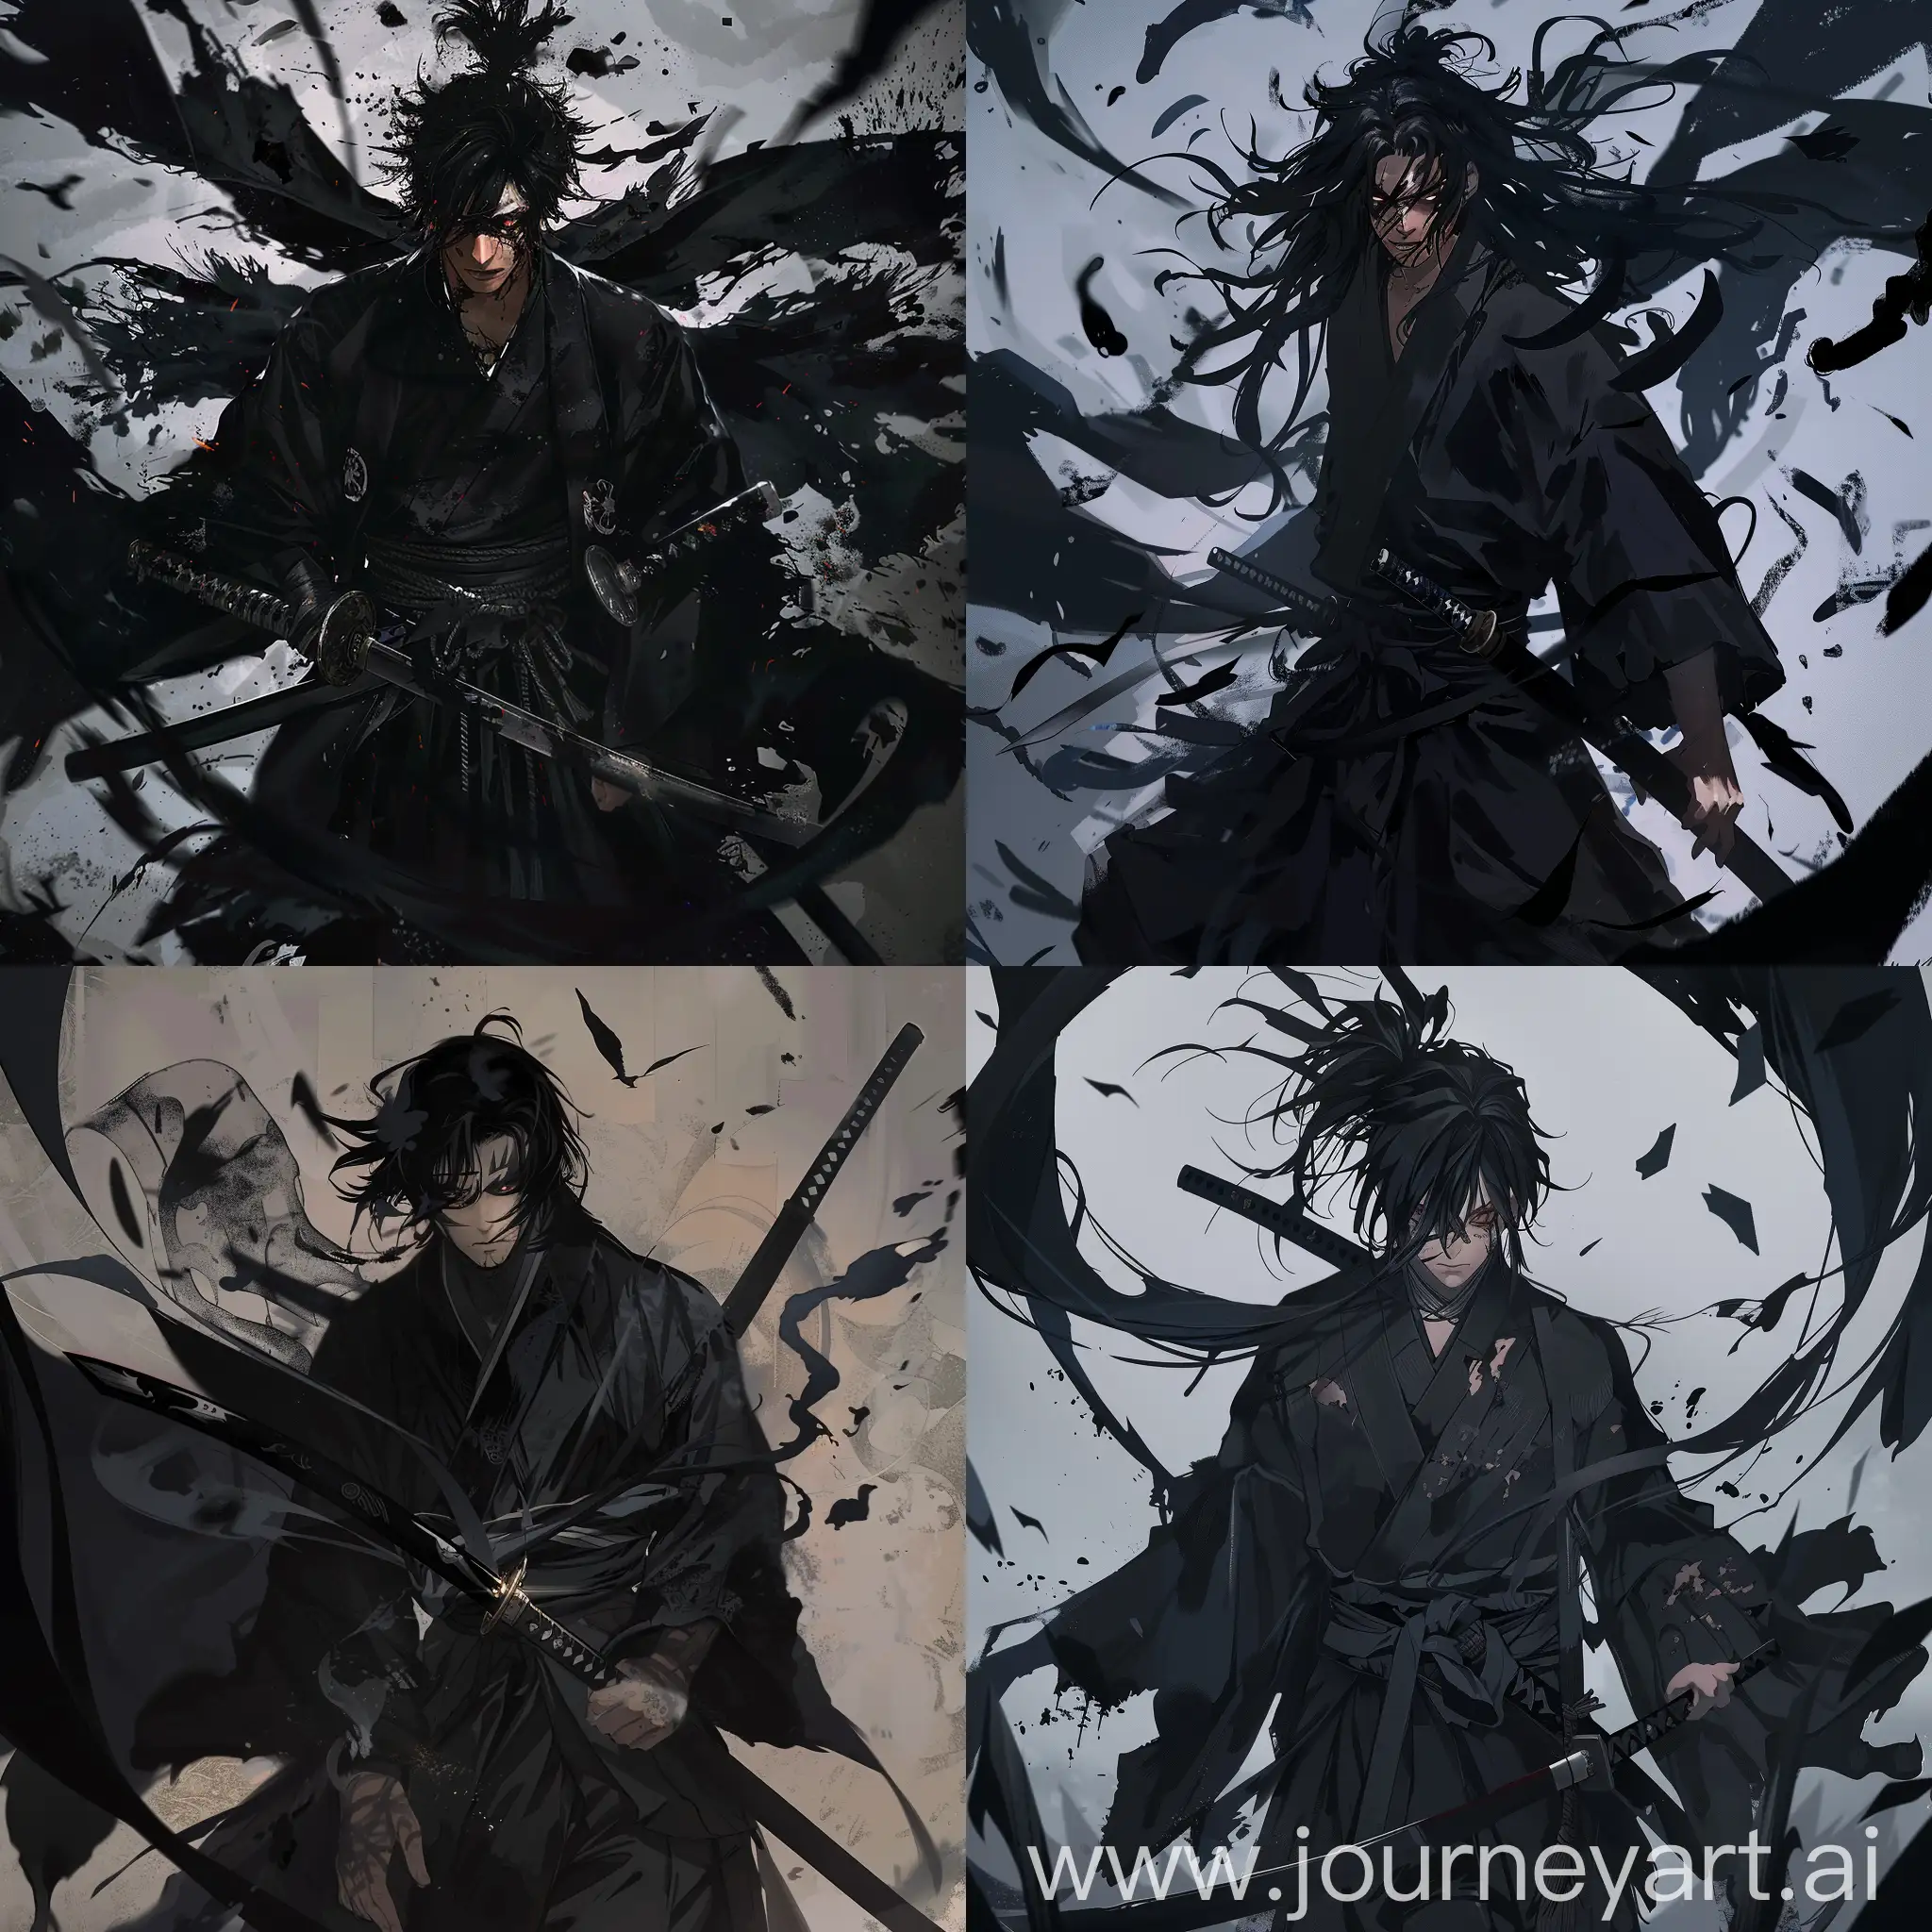 Black haired male, full body, black kimono, black katana, vagabond manga style, surrounded by shadows, anger and sadness, oni mask, shadows leaking from he blade, death stare, oni, vengeance